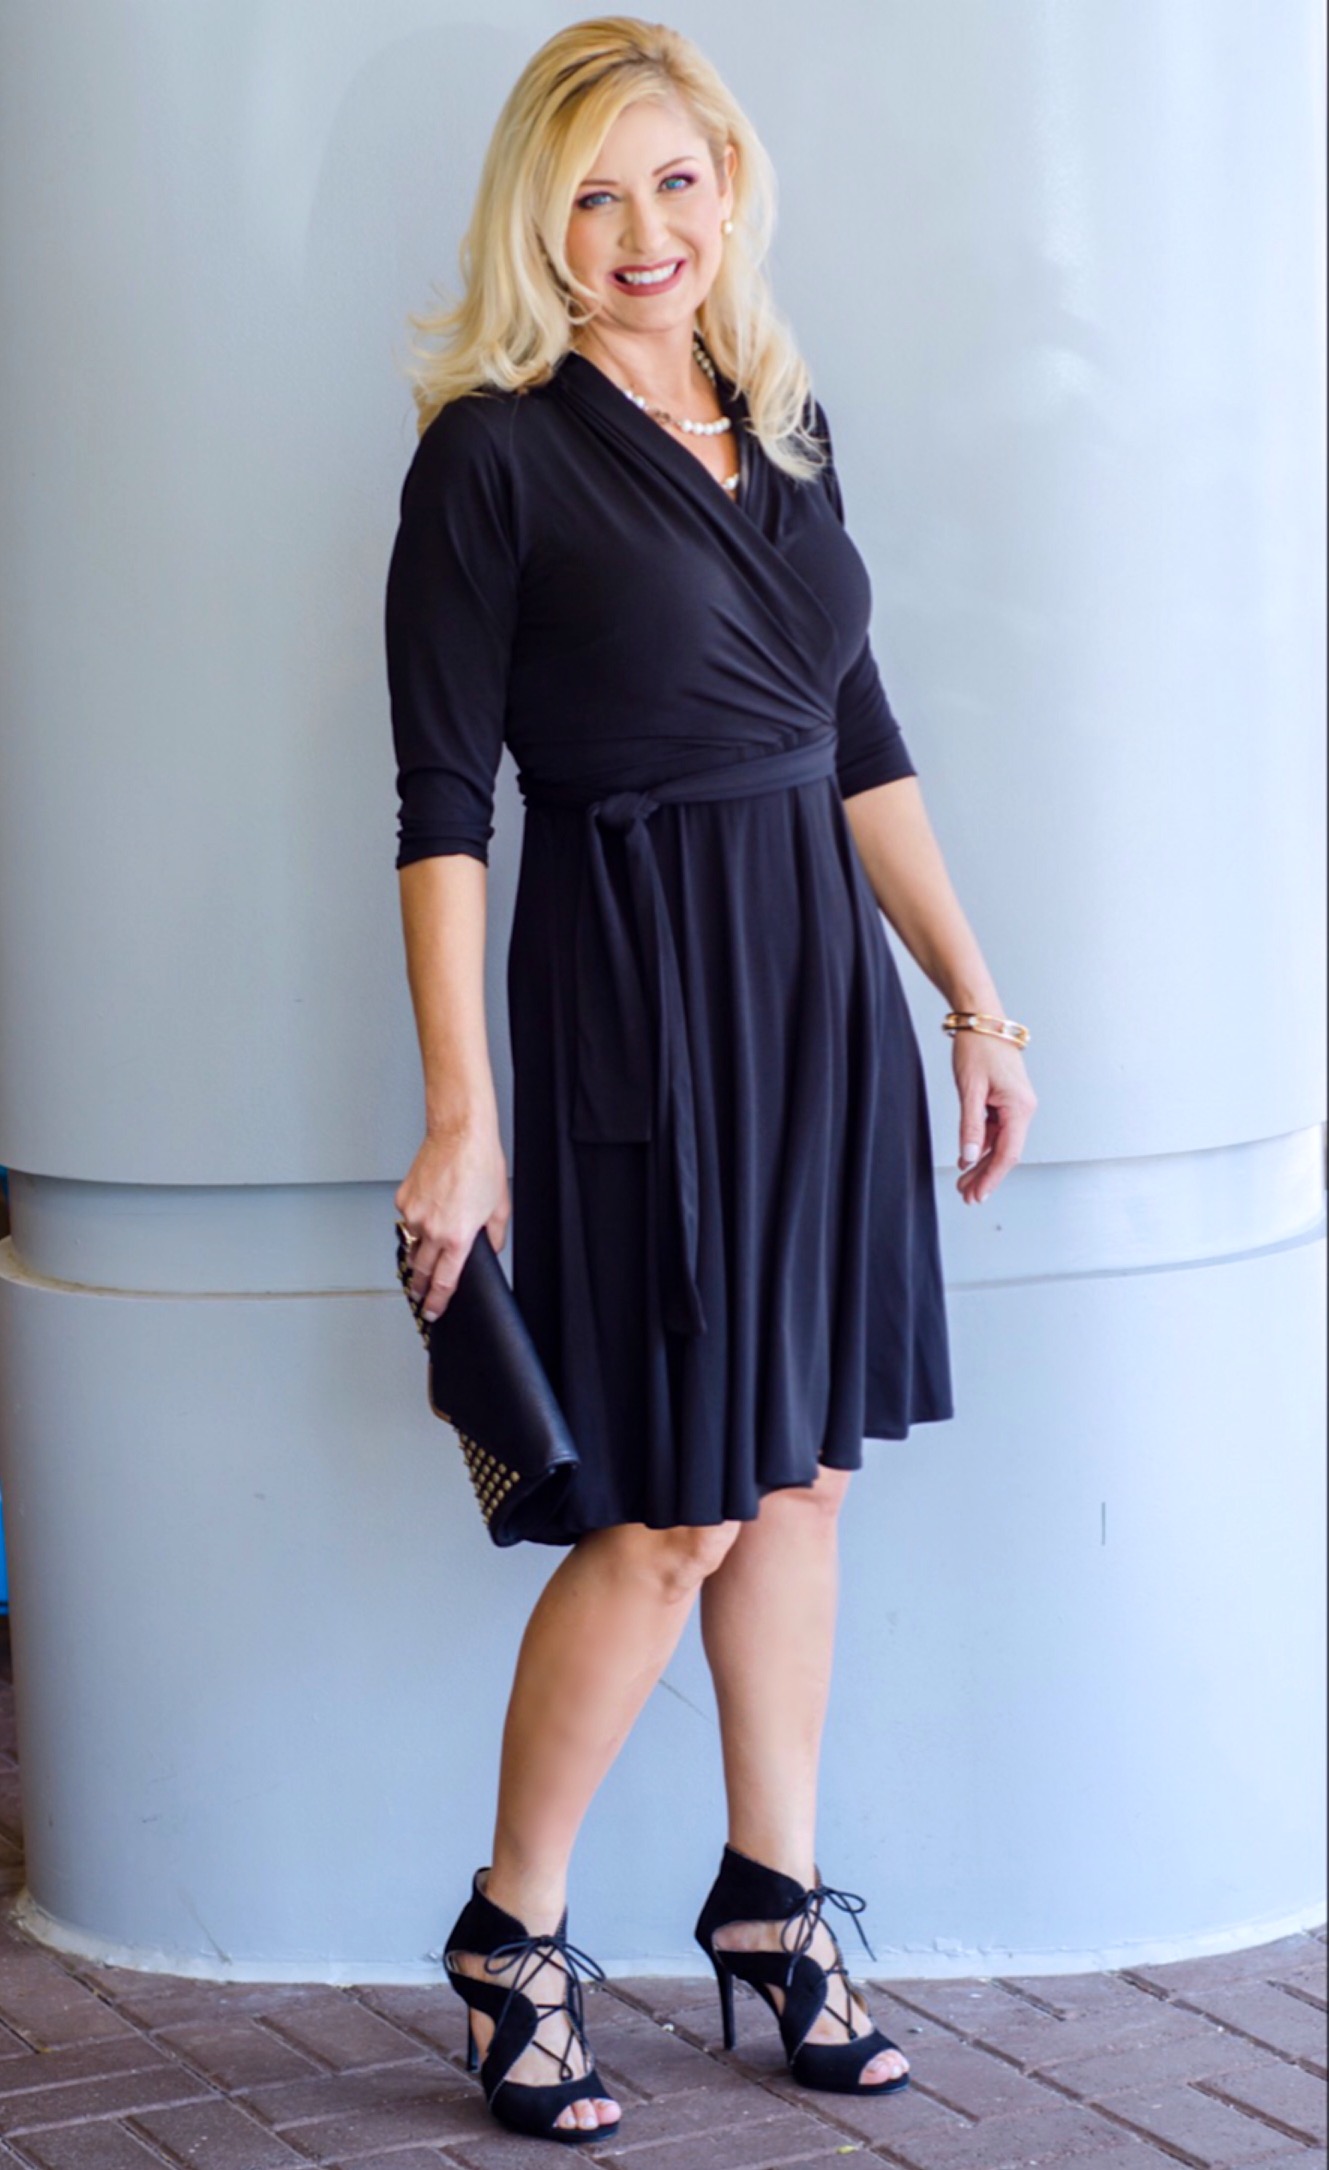 The Transitional LBD By Karina Dresses - SouthernBlondeChic